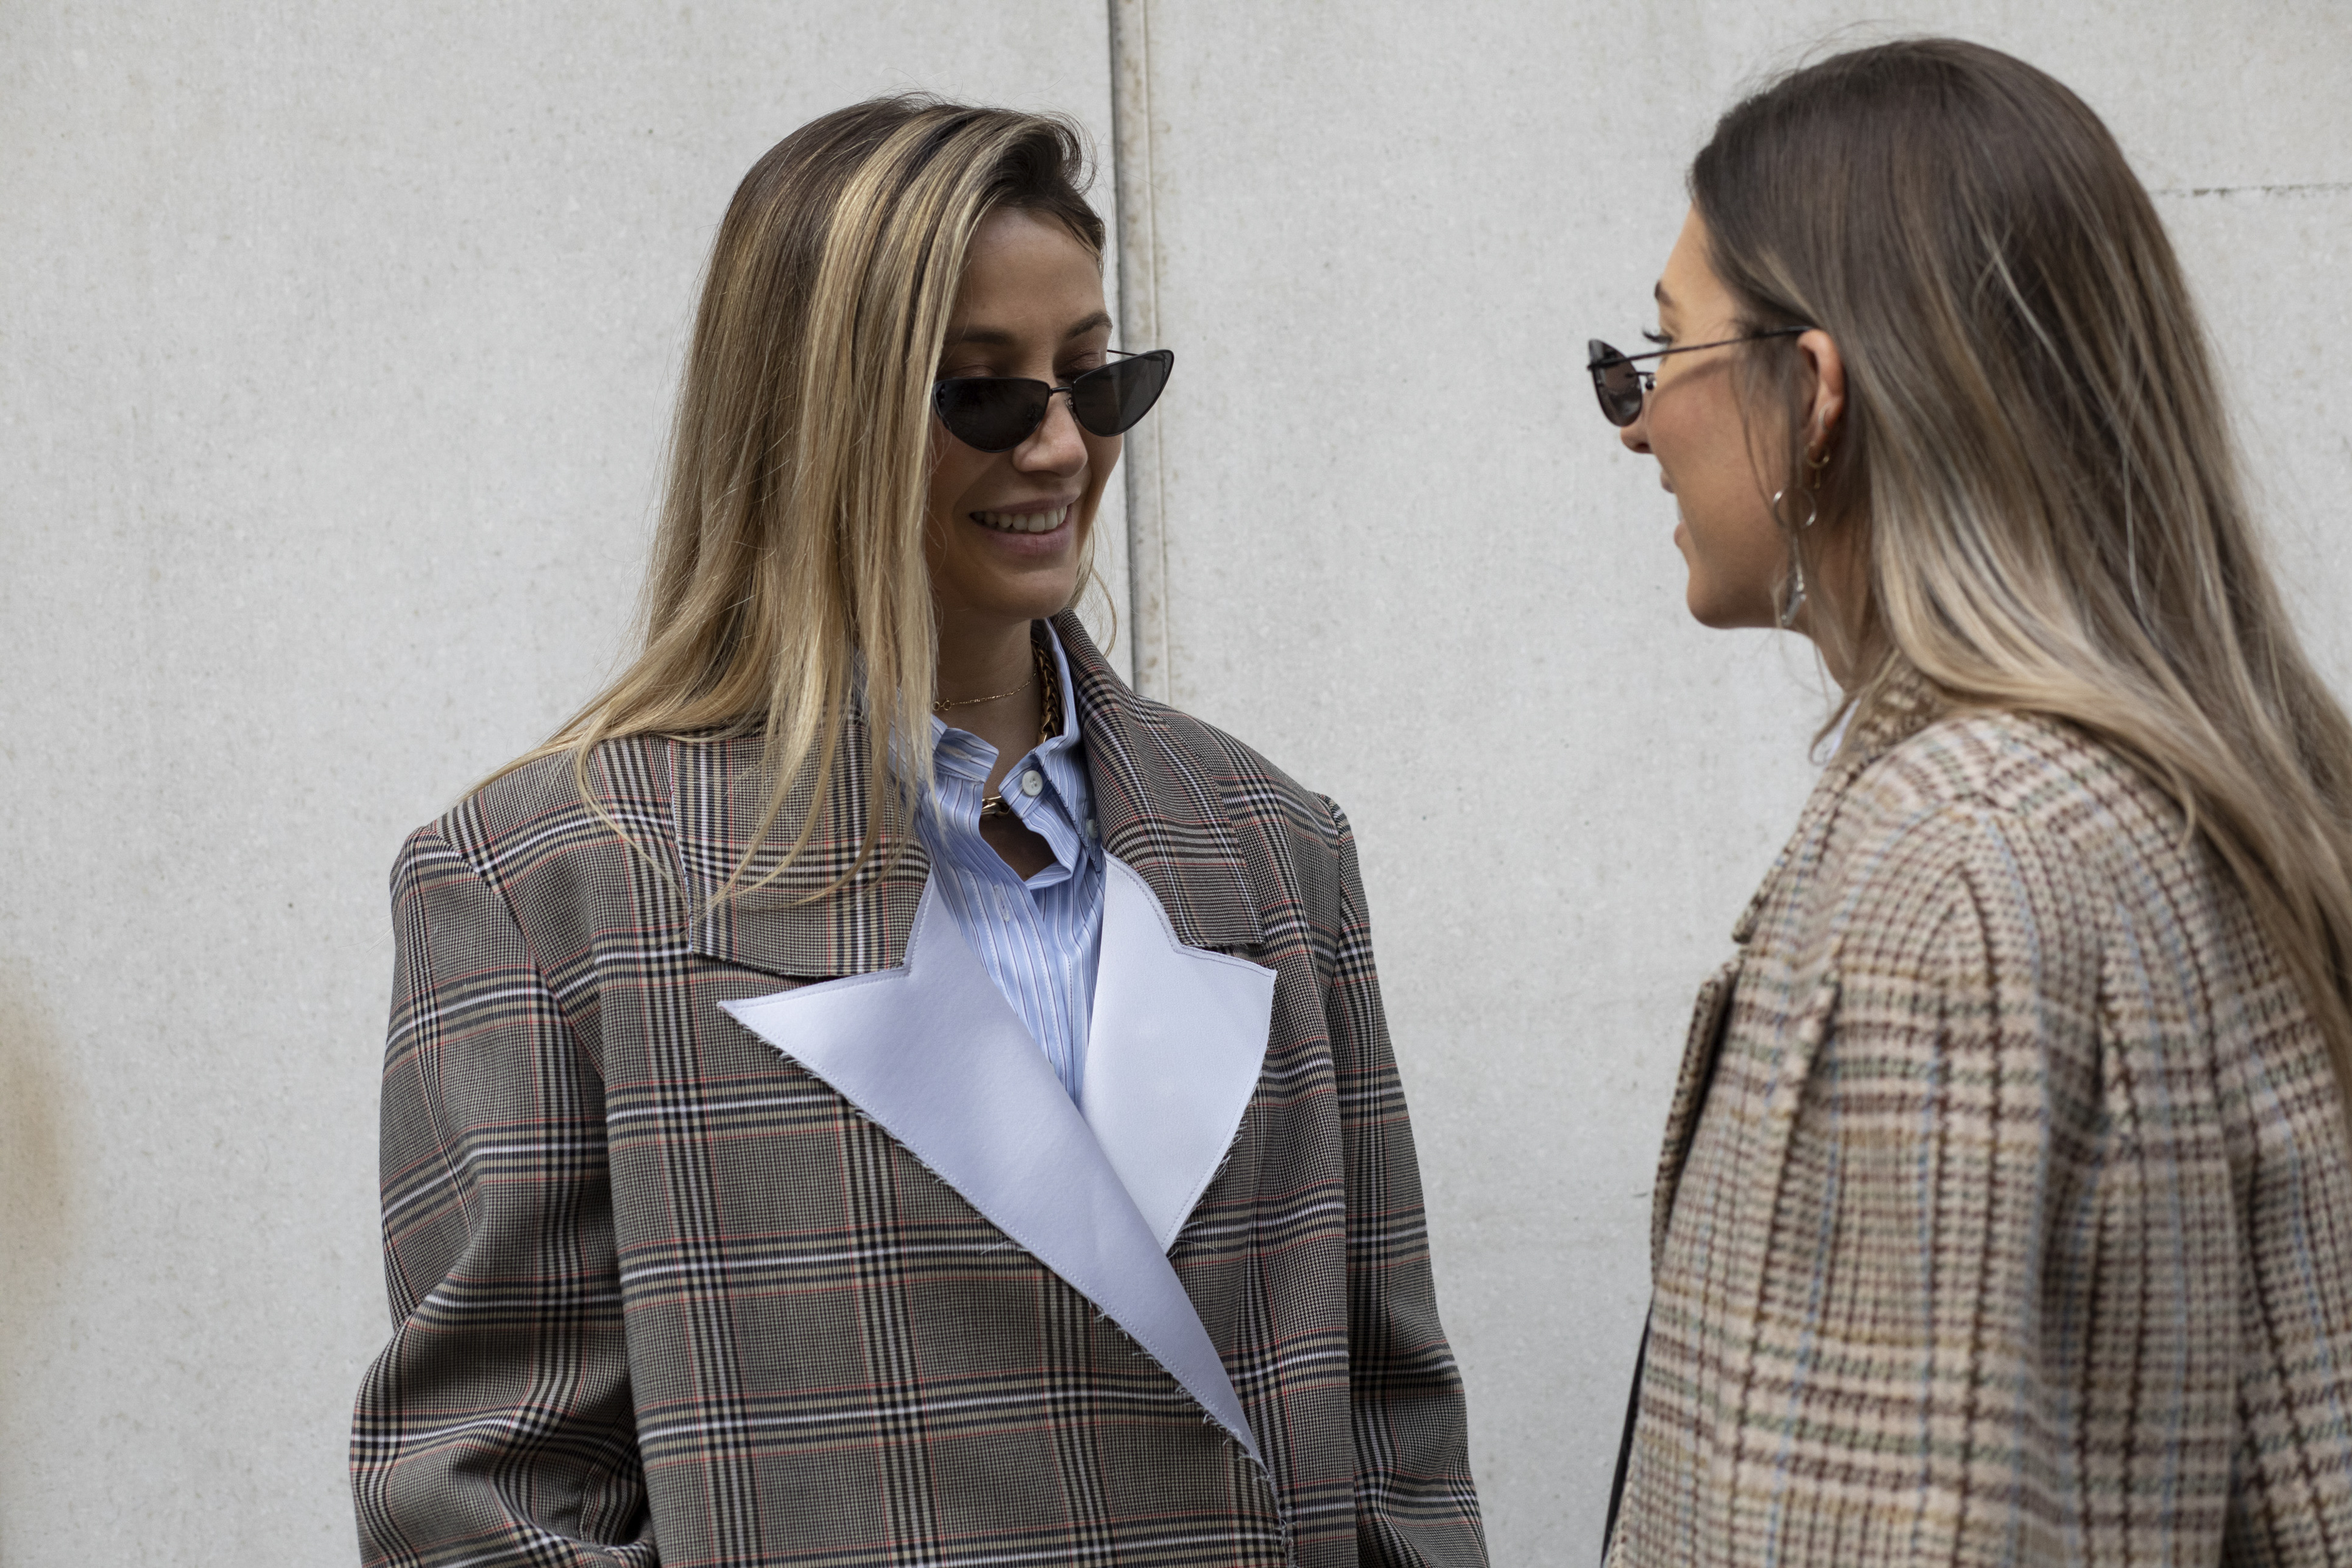 Two insiders at London Fashion Week.